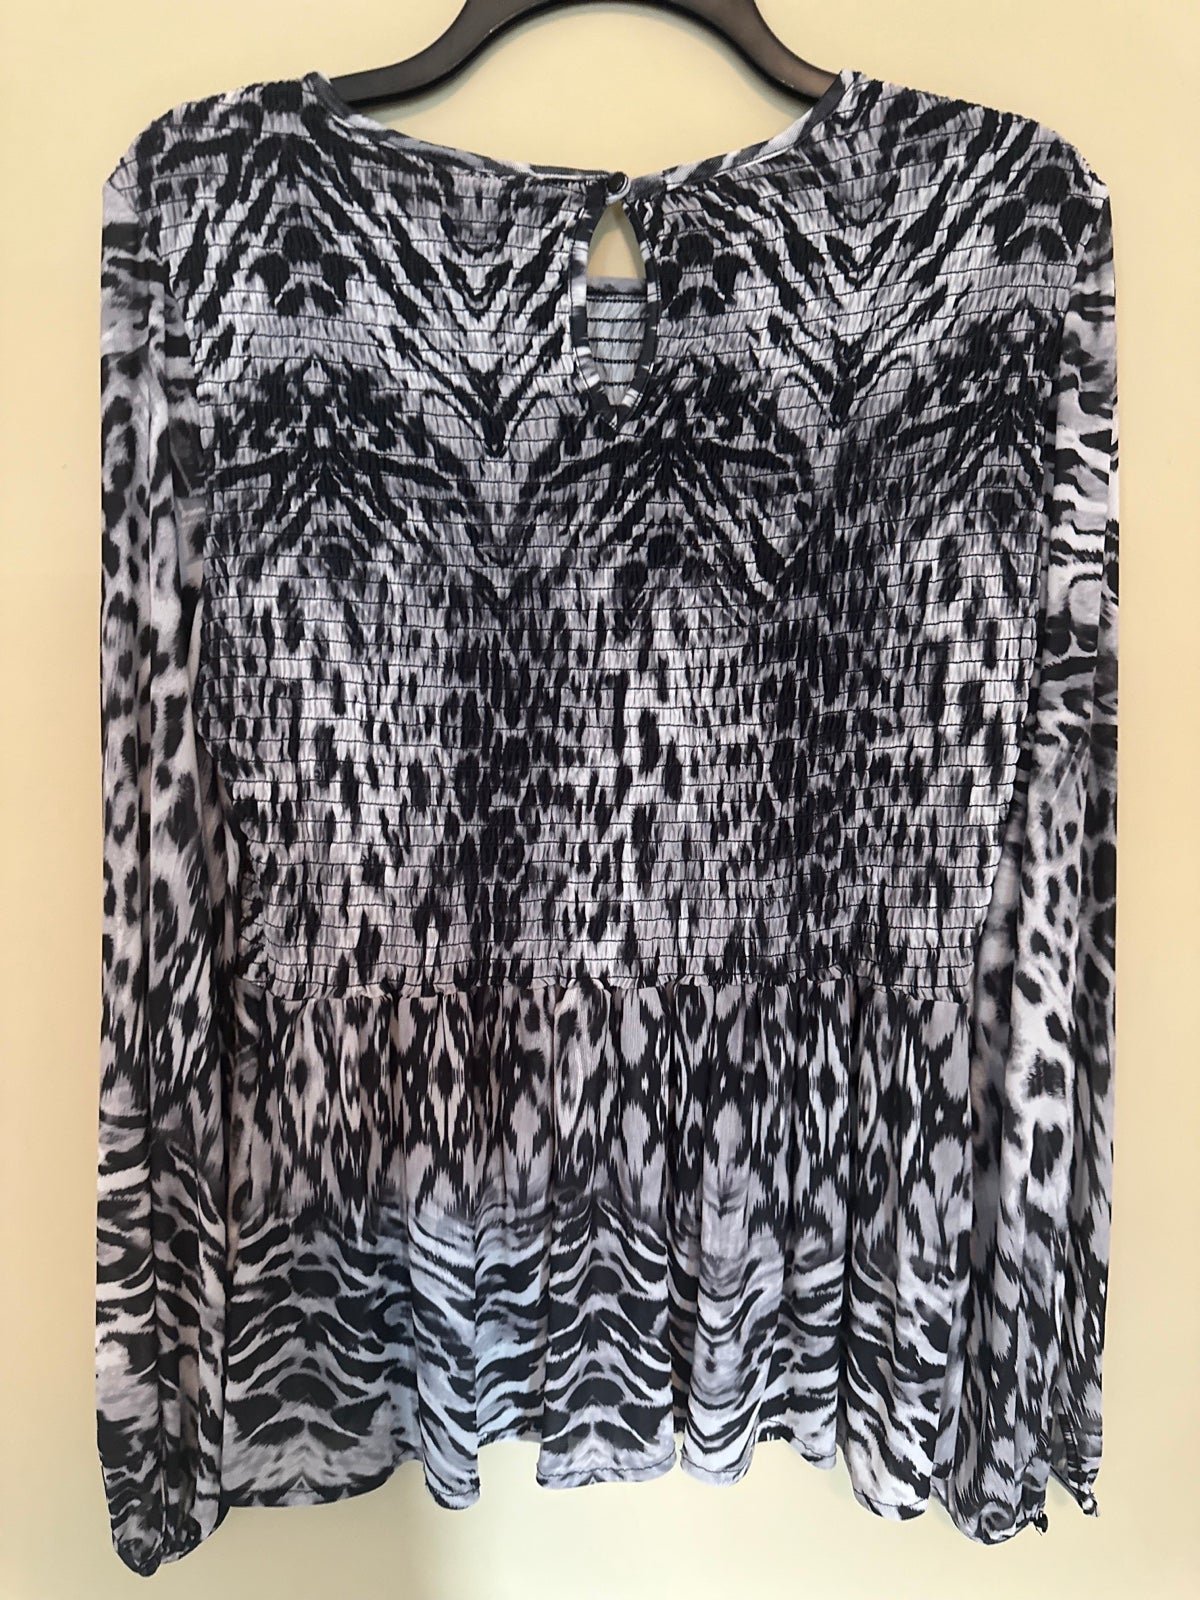 the Lowest price NWT Blouse IzrcLPBWt Low Price